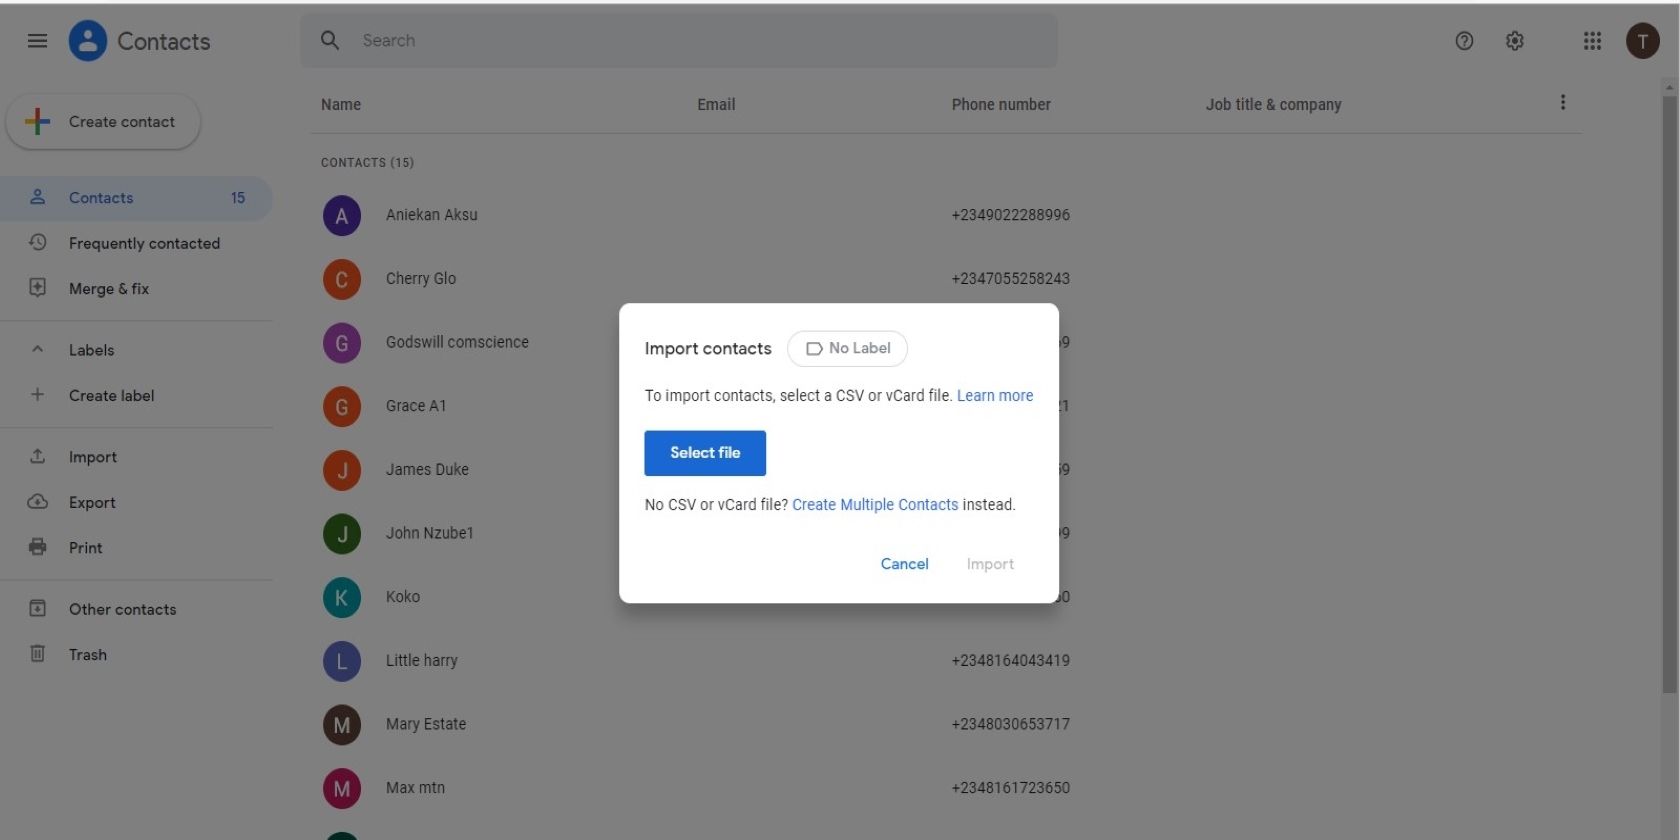 How to import your LinkedIn contacts to Gmail